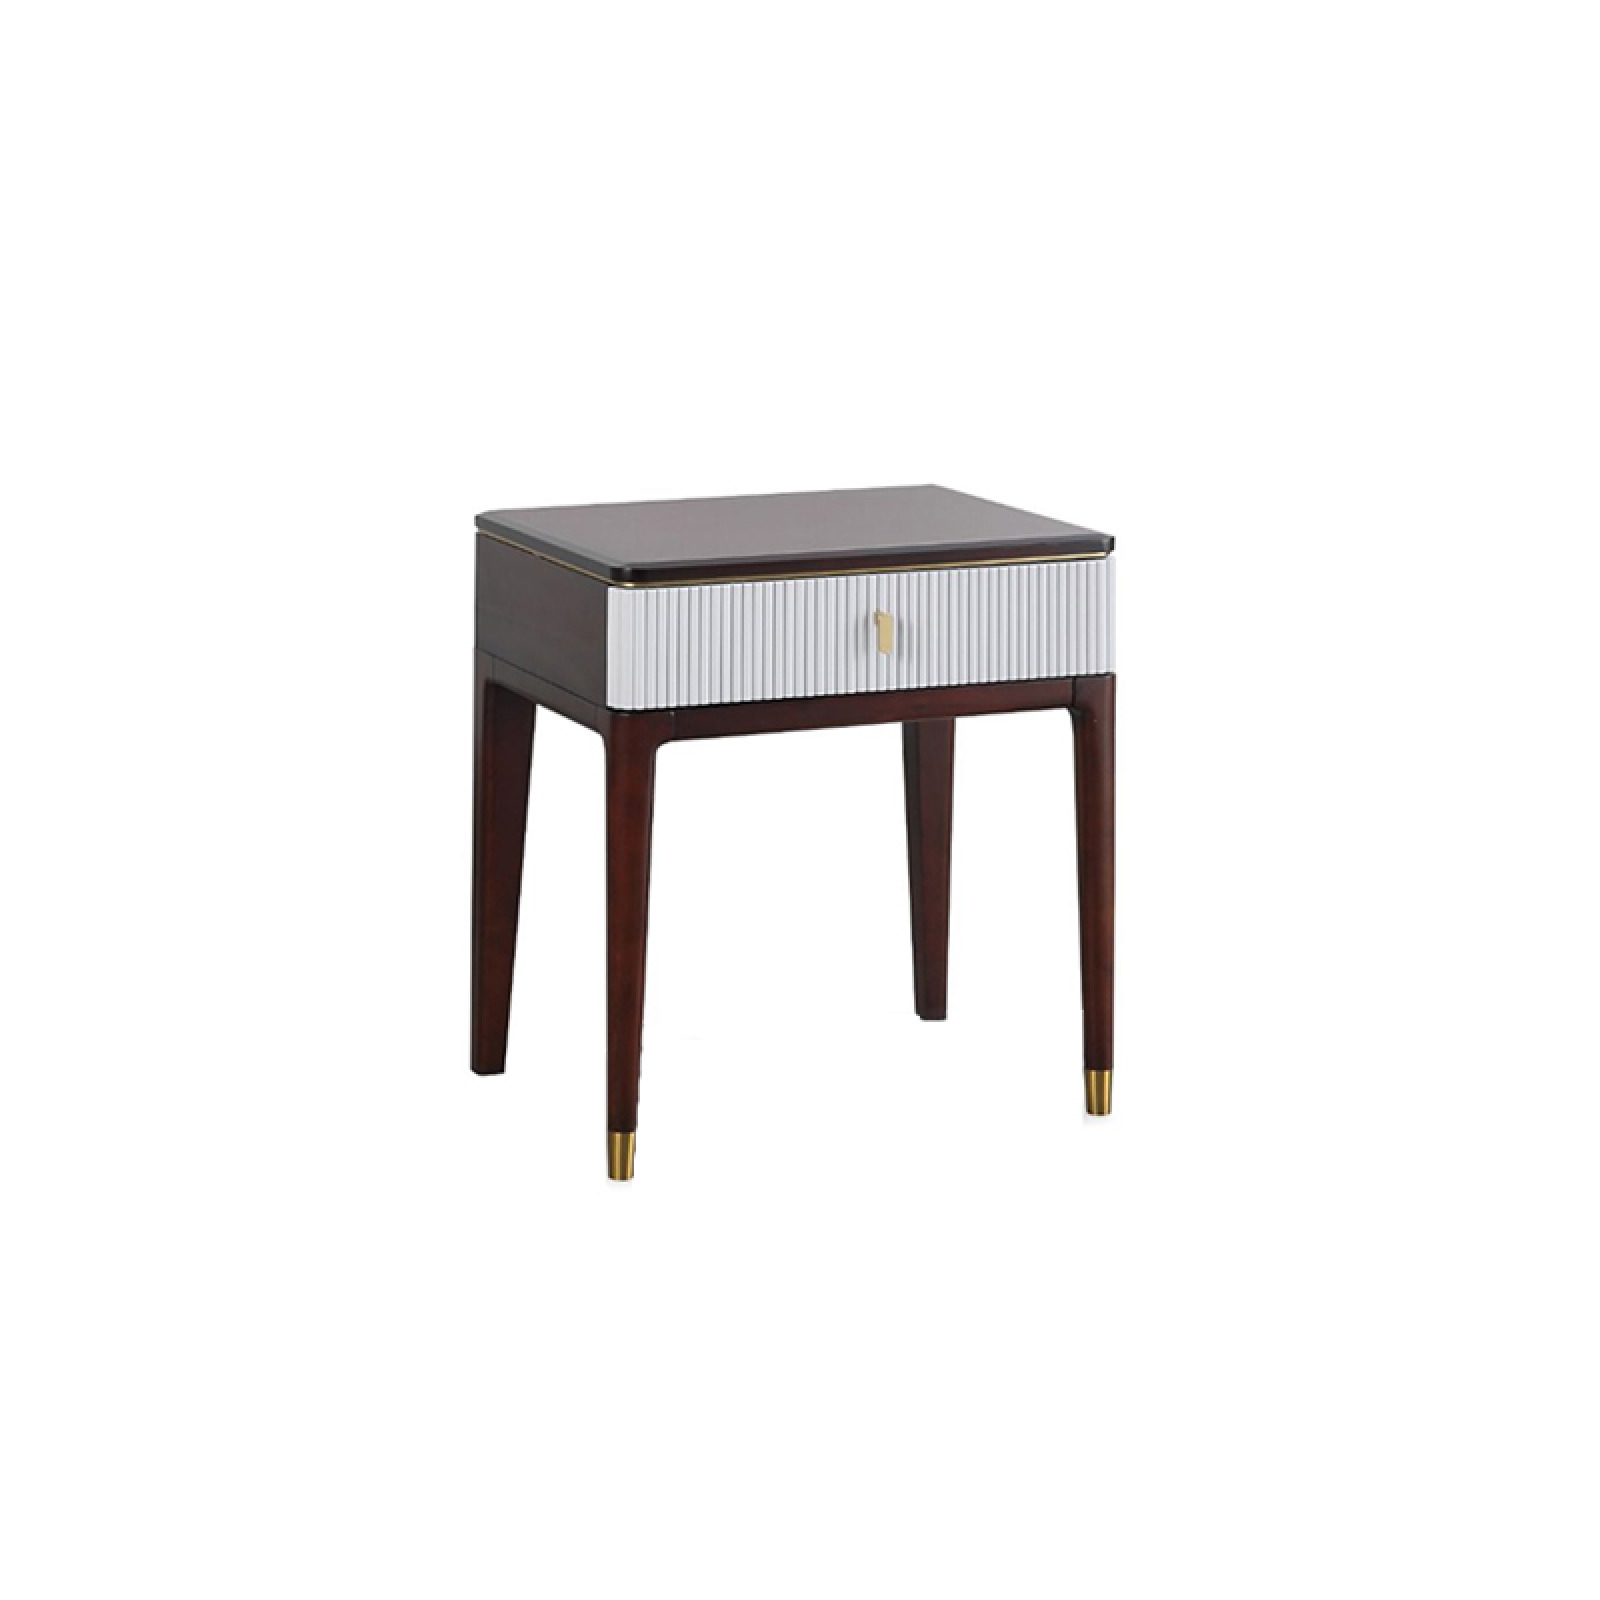 Carden side table